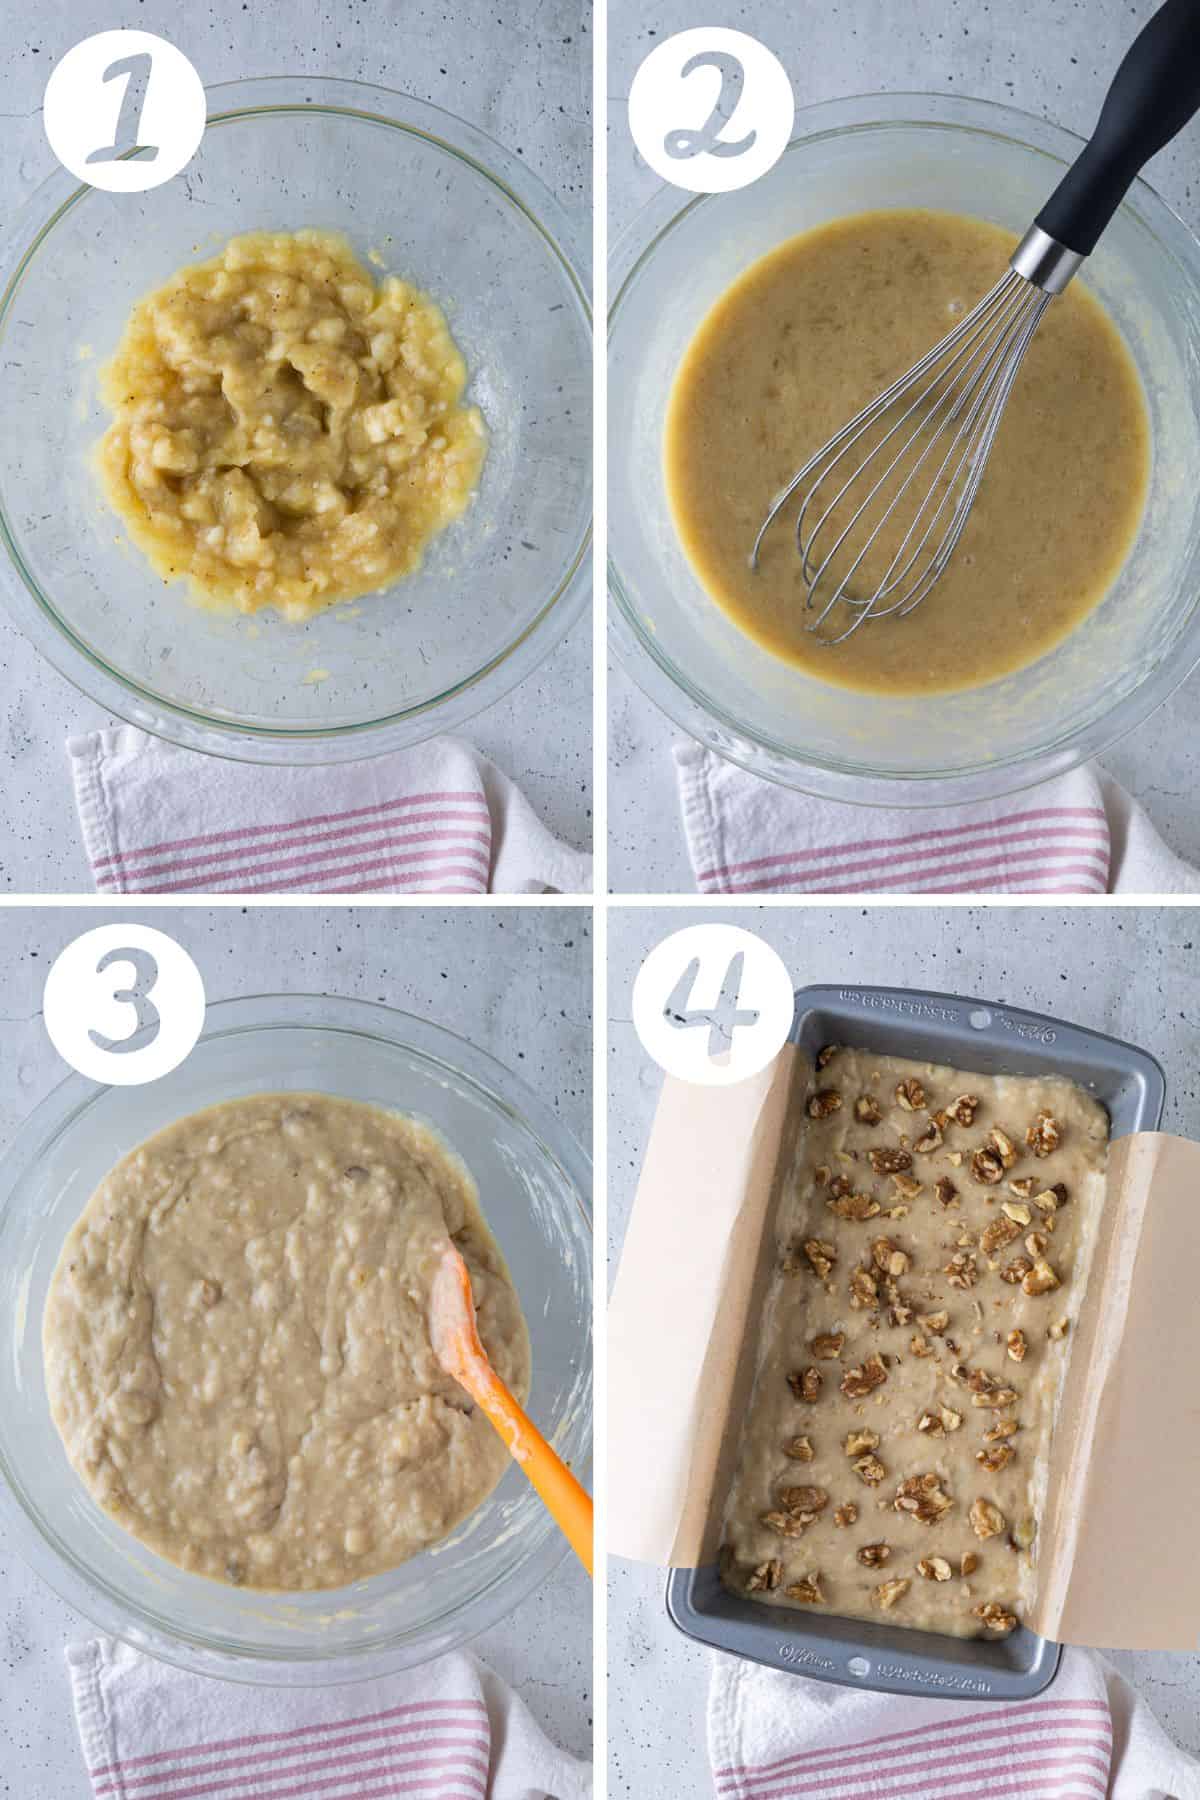 Step-by-step instructions for making banana bread.